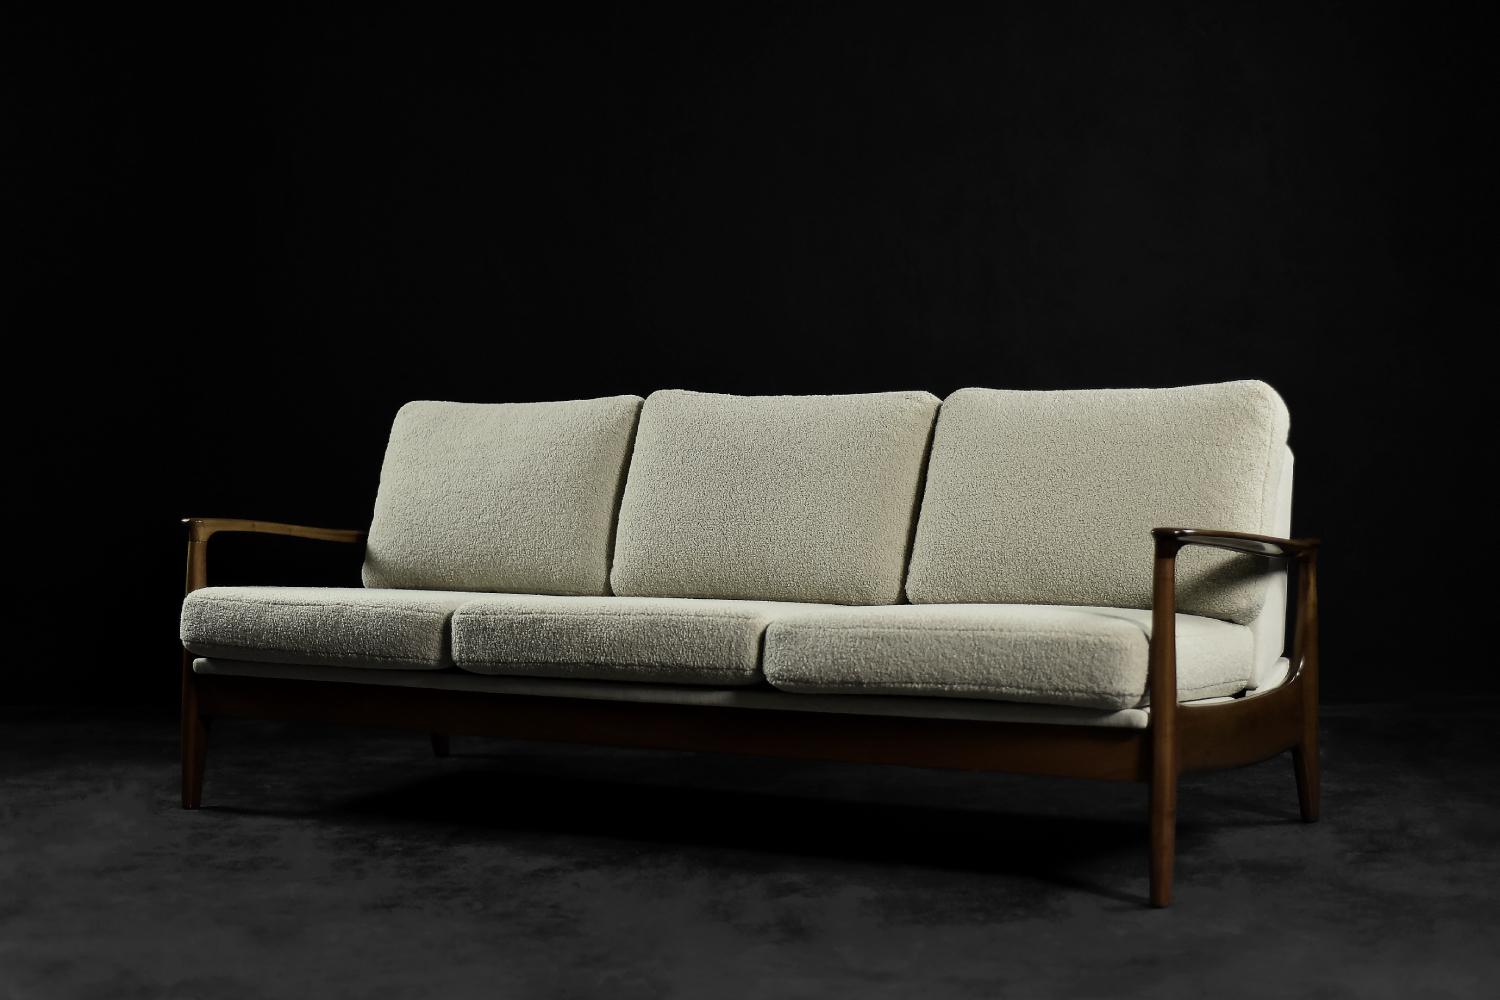 This elegant three-seater daybed was designed by Eugen Schmidt for the German Soloform factory during the 1960s. The organic frame is made of teak wood in a light shade of brown. The sofa has a simple spring mechanism that allows it to be unfolded